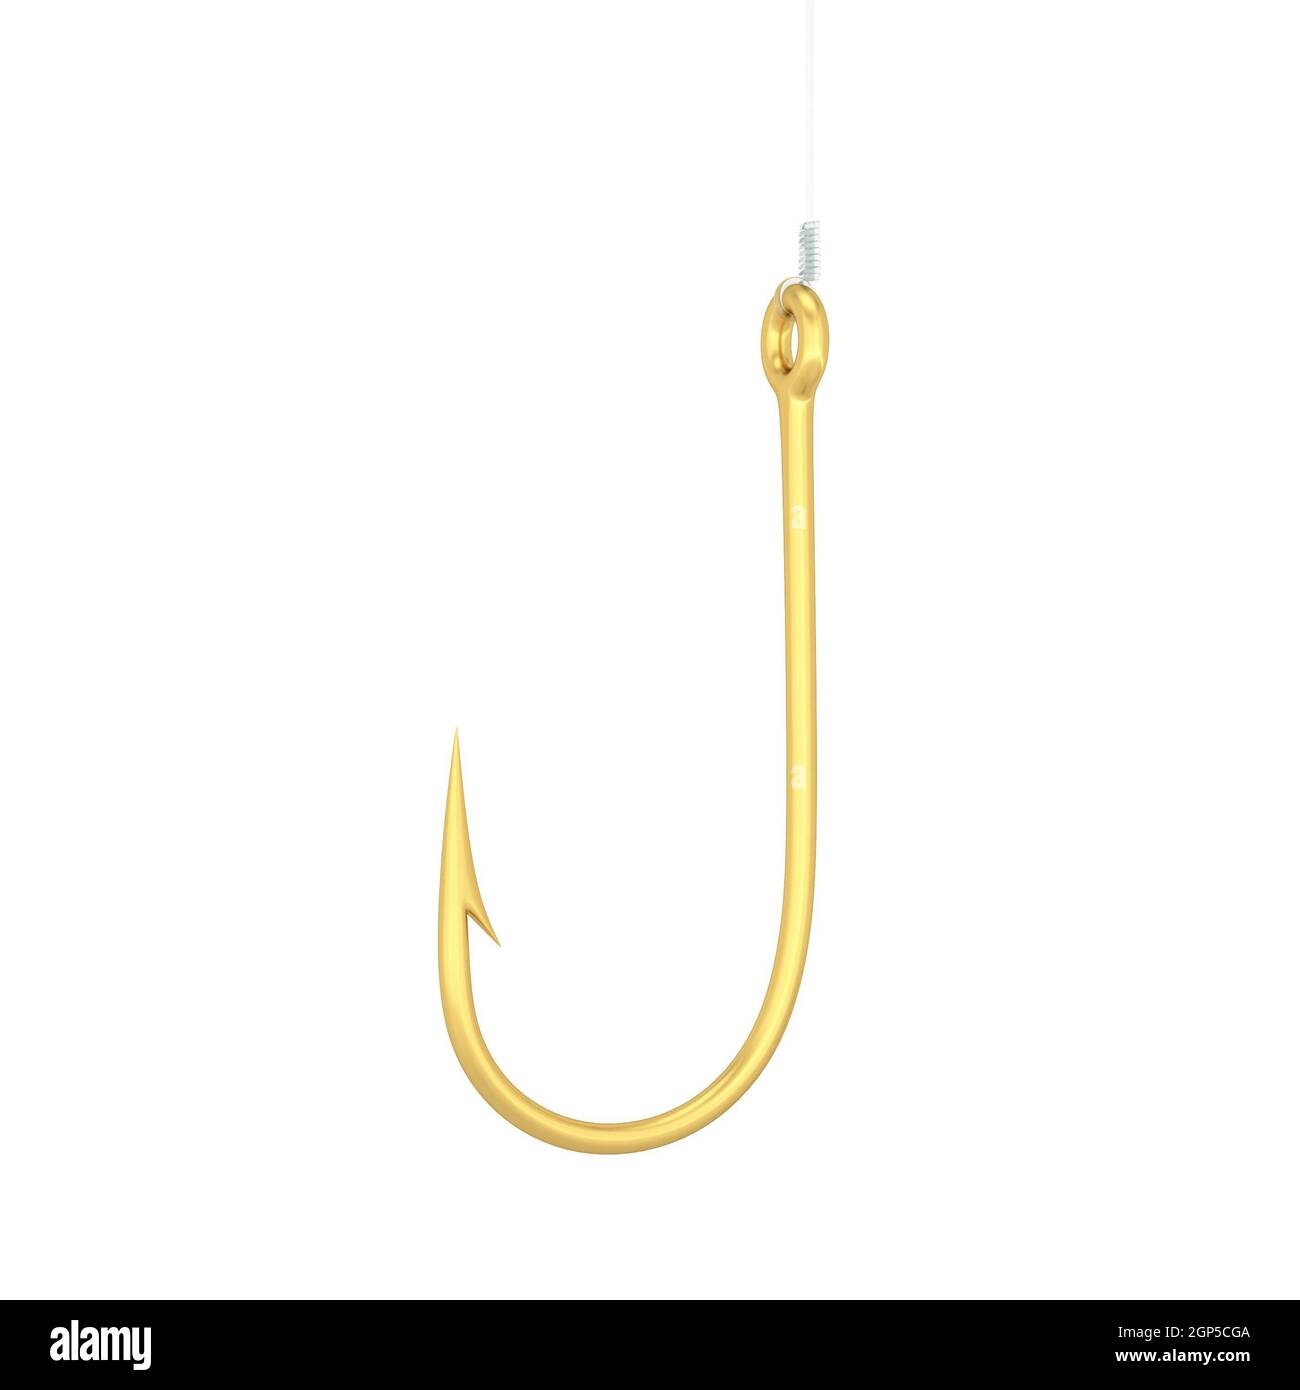 Golden fishhook Cut Out Stock Images & Pictures - Alamy